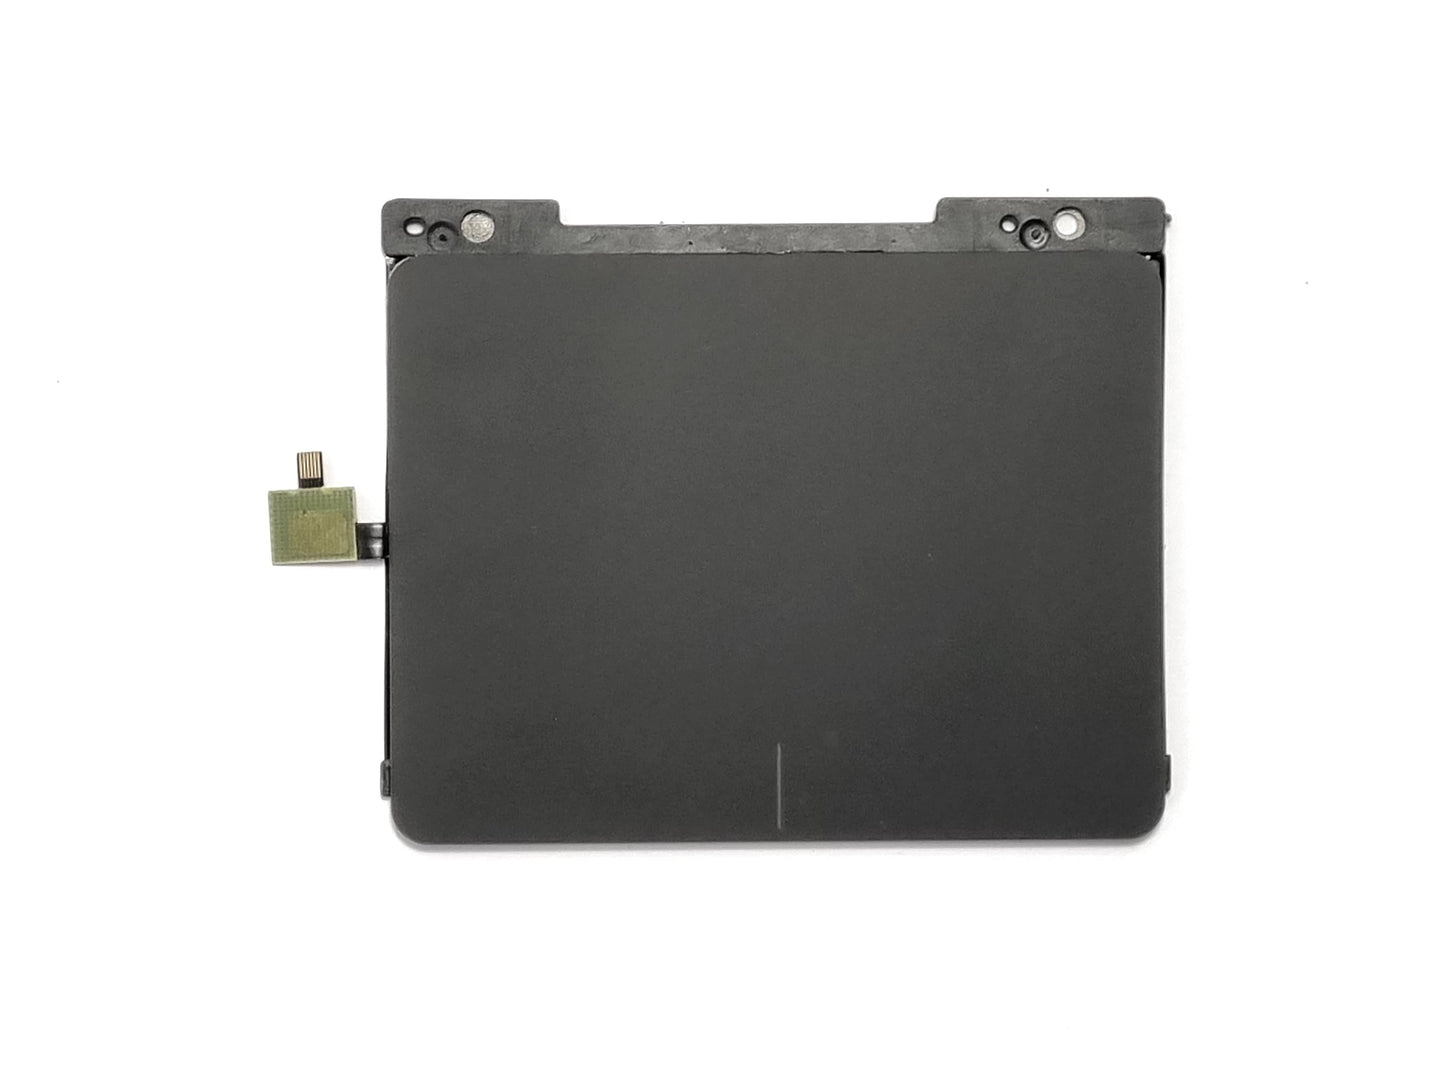 New Dell XPS 15 9530 Laptop Touchpad with Ribbon Cable HWCP0 0HWCP0